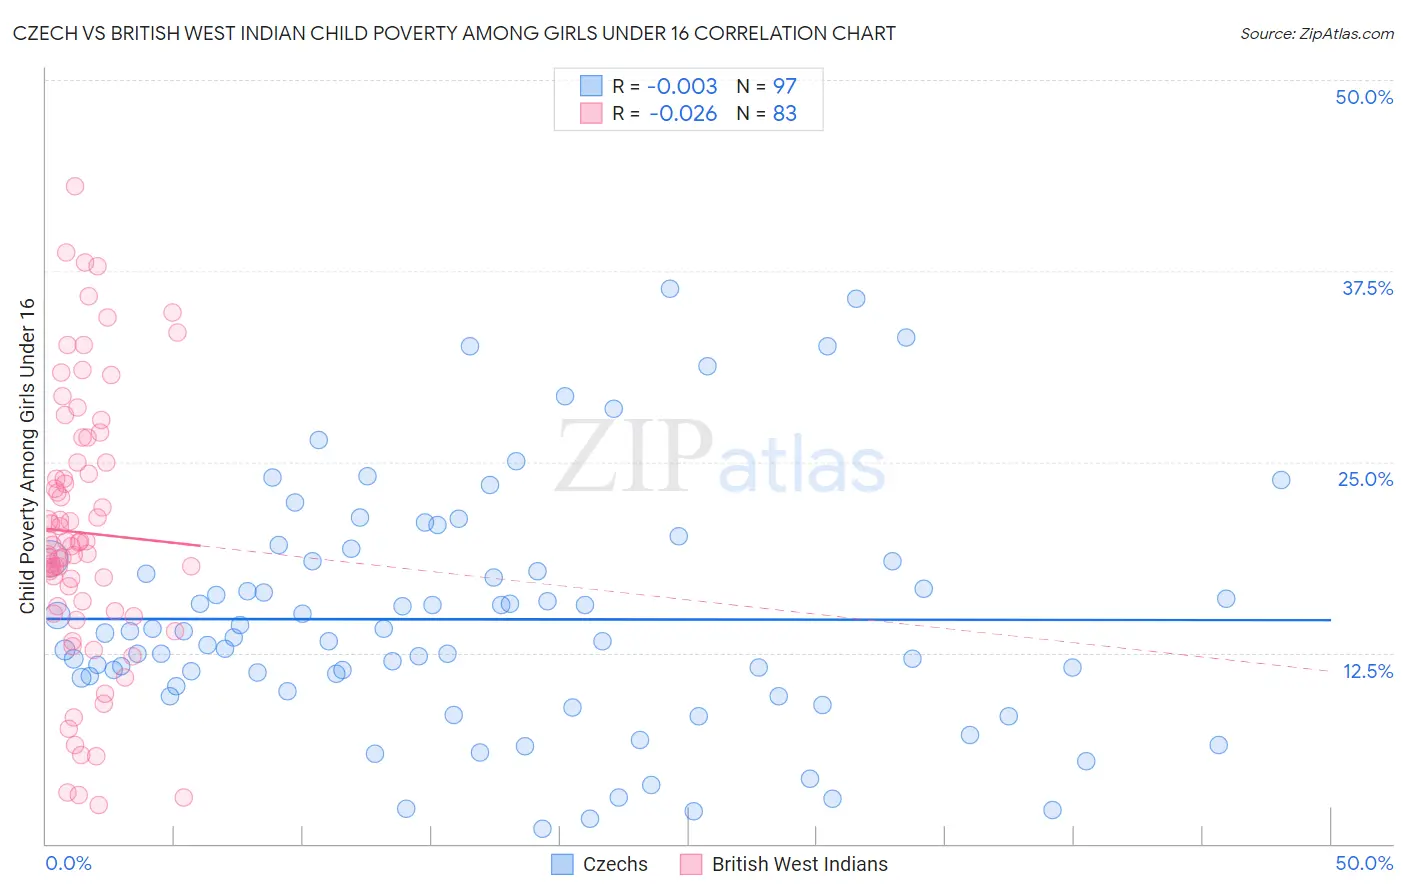 Czech vs British West Indian Child Poverty Among Girls Under 16